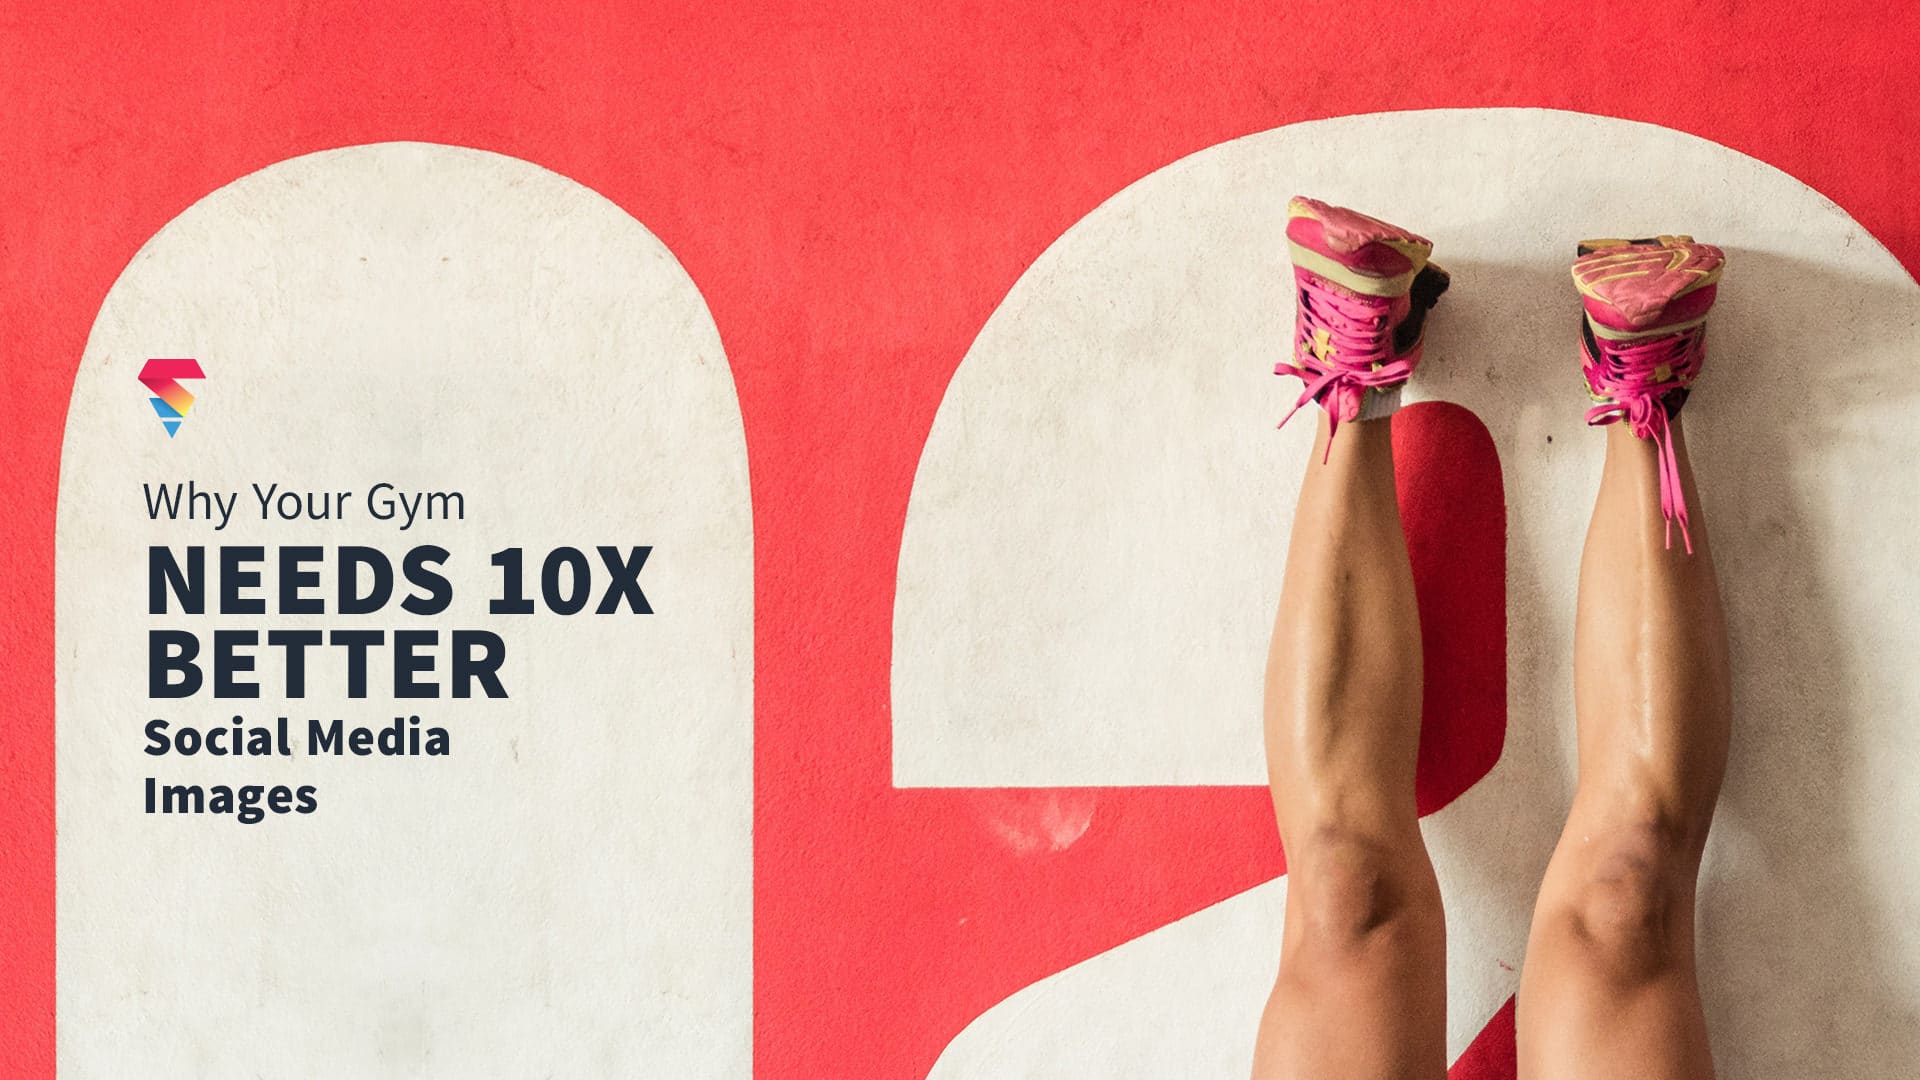 Why Your Gym Needs 10x Better Social Media Images